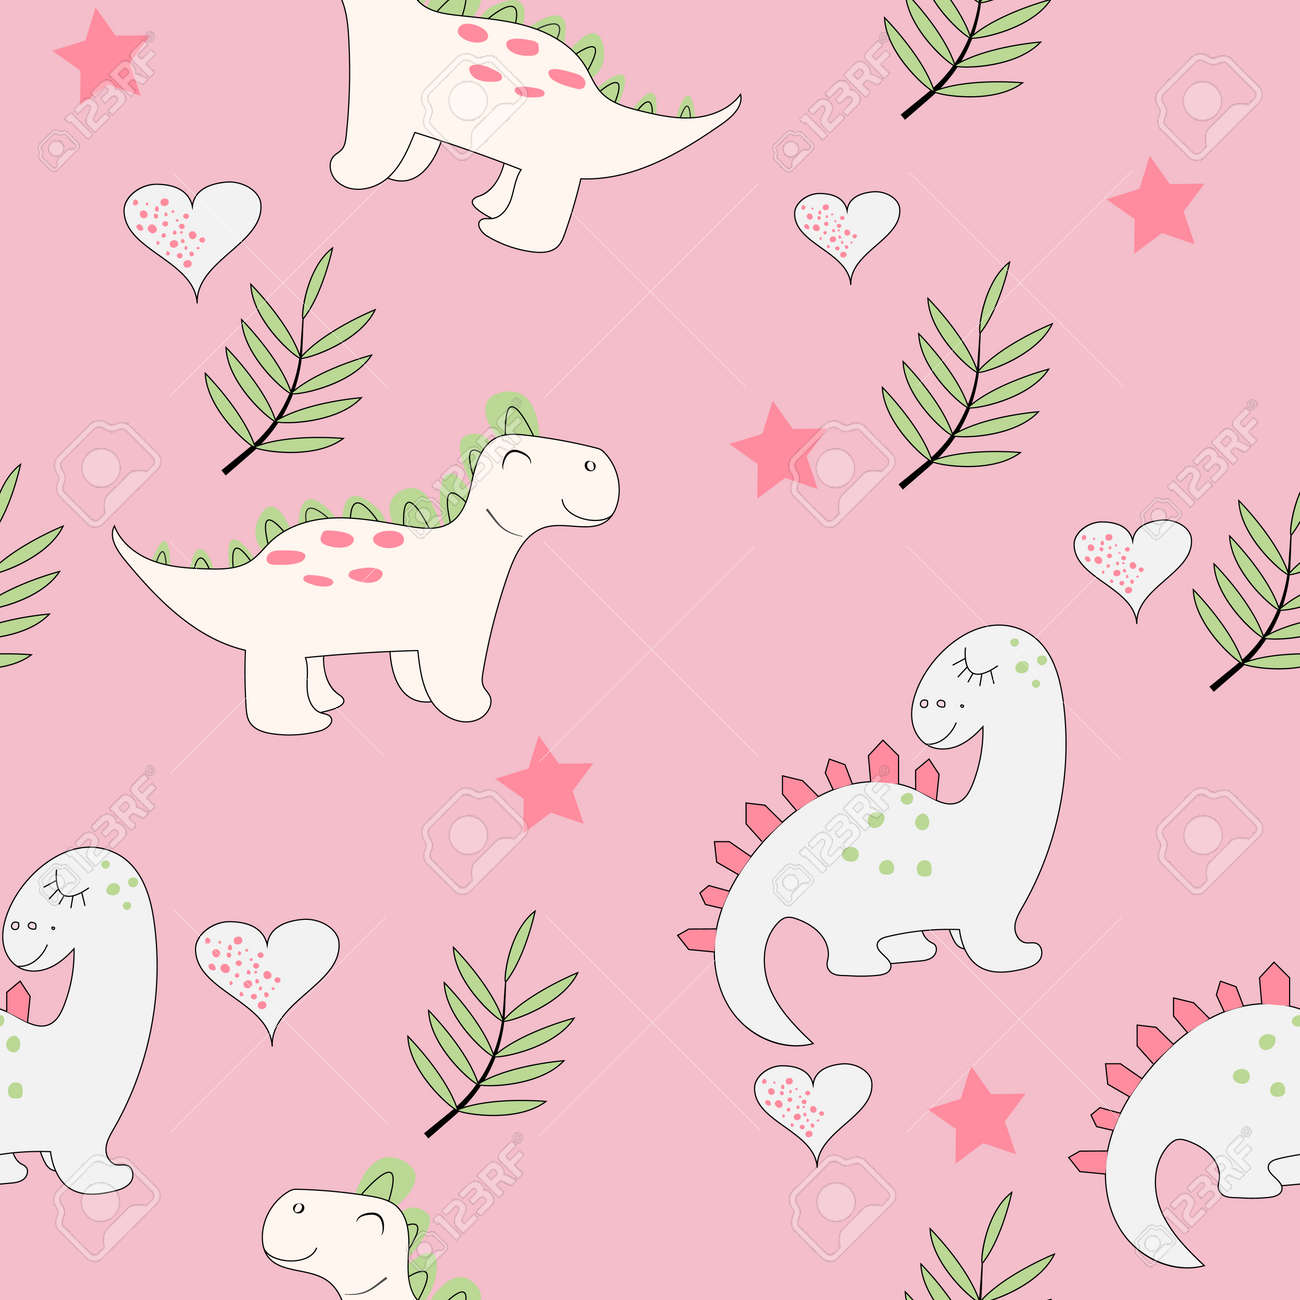 Cute Baby Dinosaur Seamless Pattern On The Light Pink Background